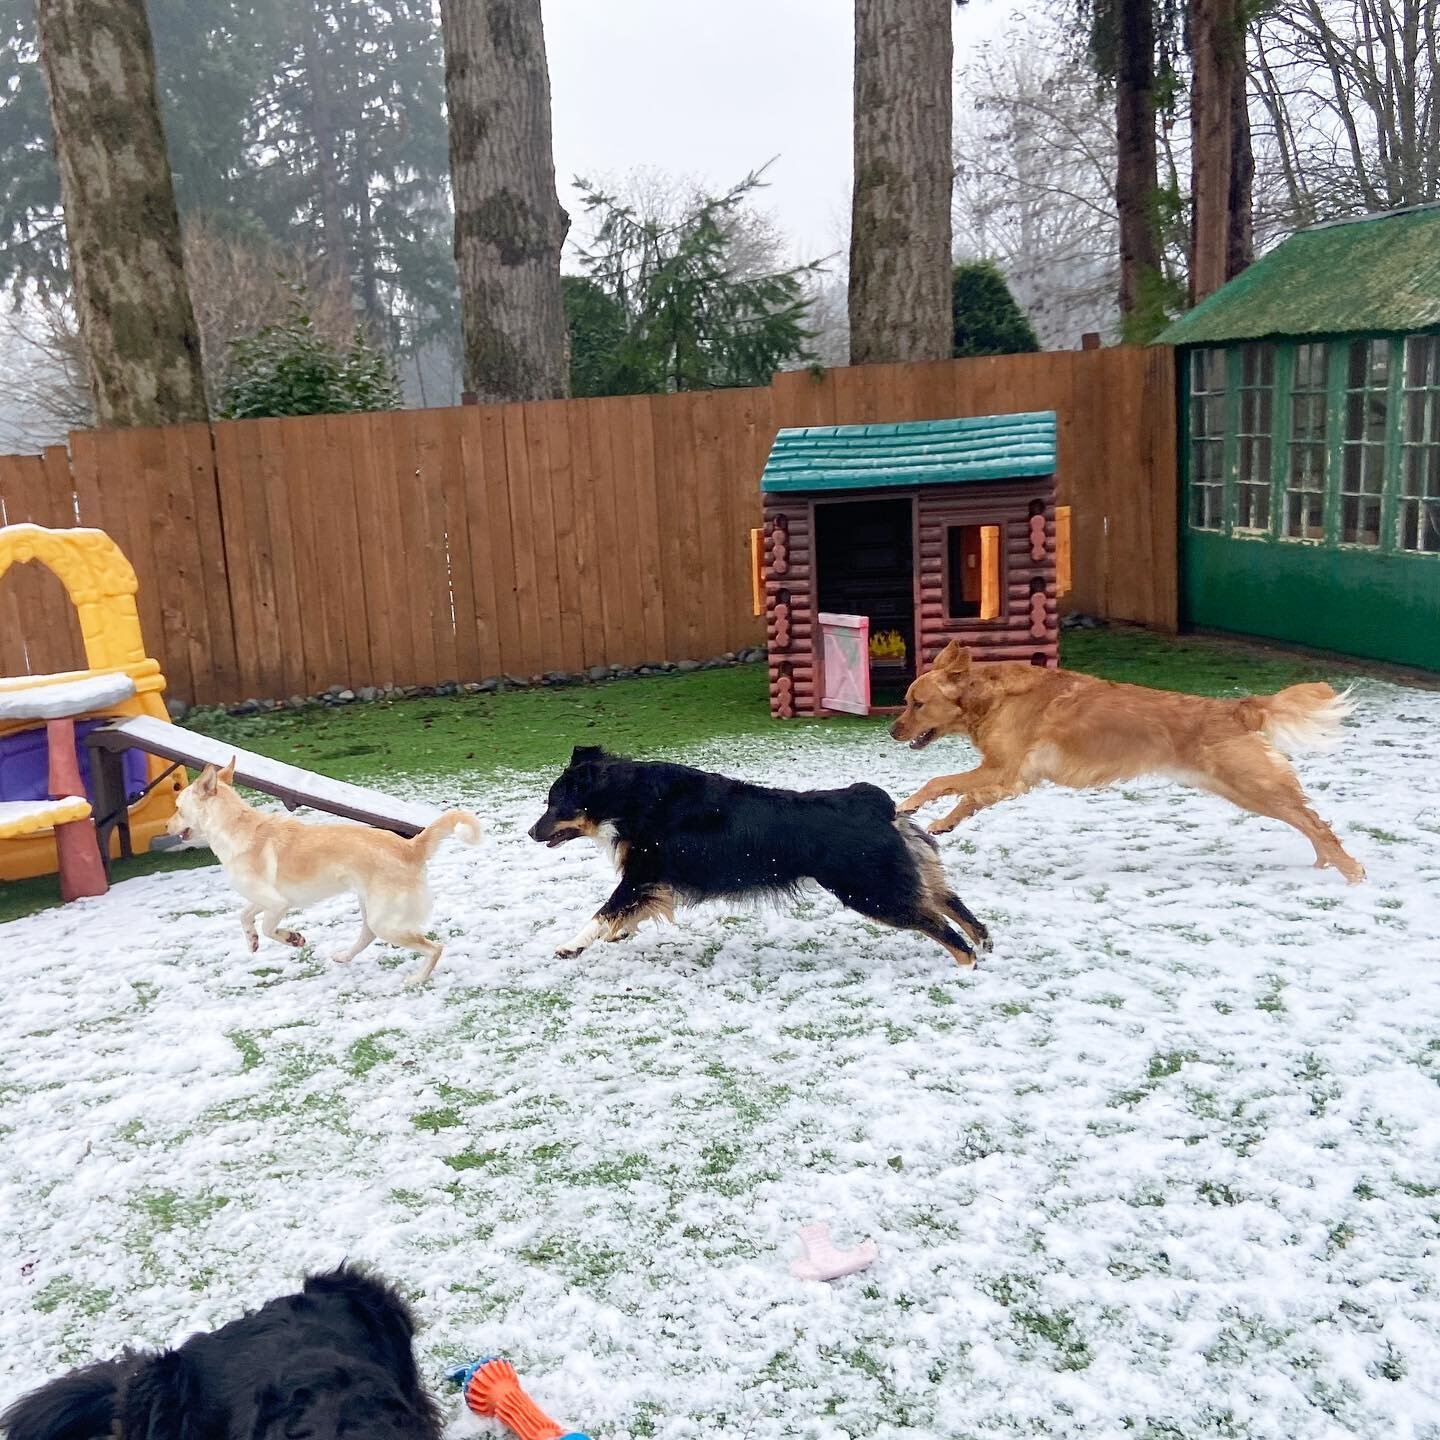 Running through the snow again today, these pups are getting spoiled this winter ❄️